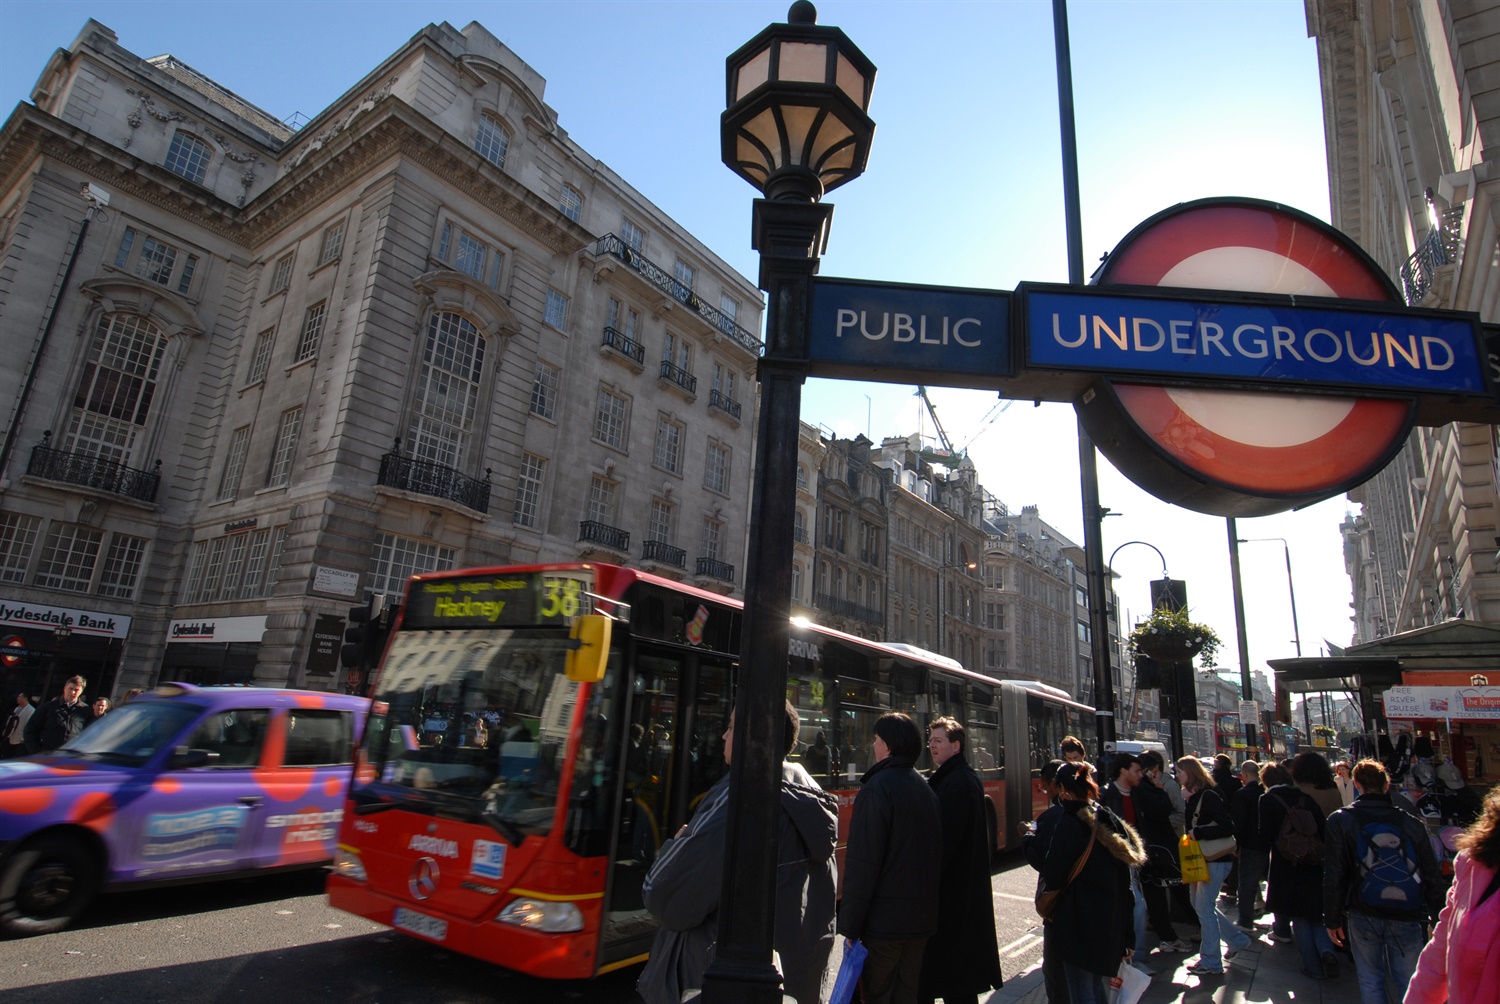 Unions to stage further Tube strikes